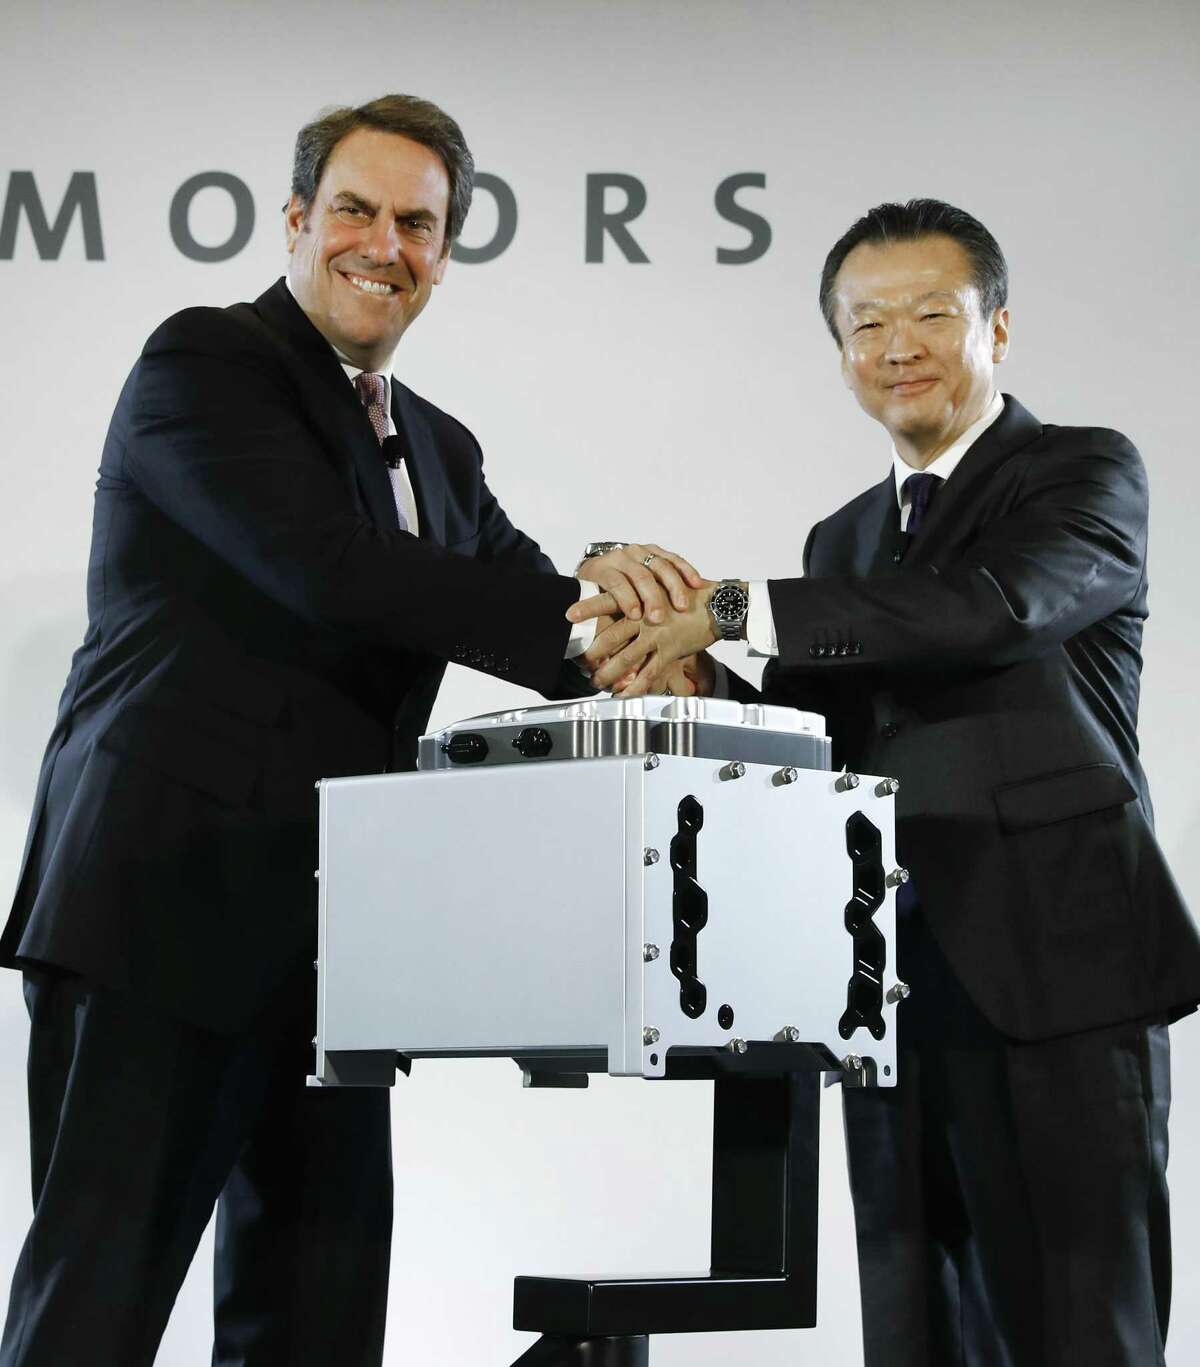 Mark Reuss (left), General Motors executive vice president of global product development, and Toshiaki Mikoshiba, chief operating officer of the North American Region for Honda Motor Co., shake hands at a news conference announcing a joint venture to produce hydrogen fuel cell systems for both companies’ vehicles.